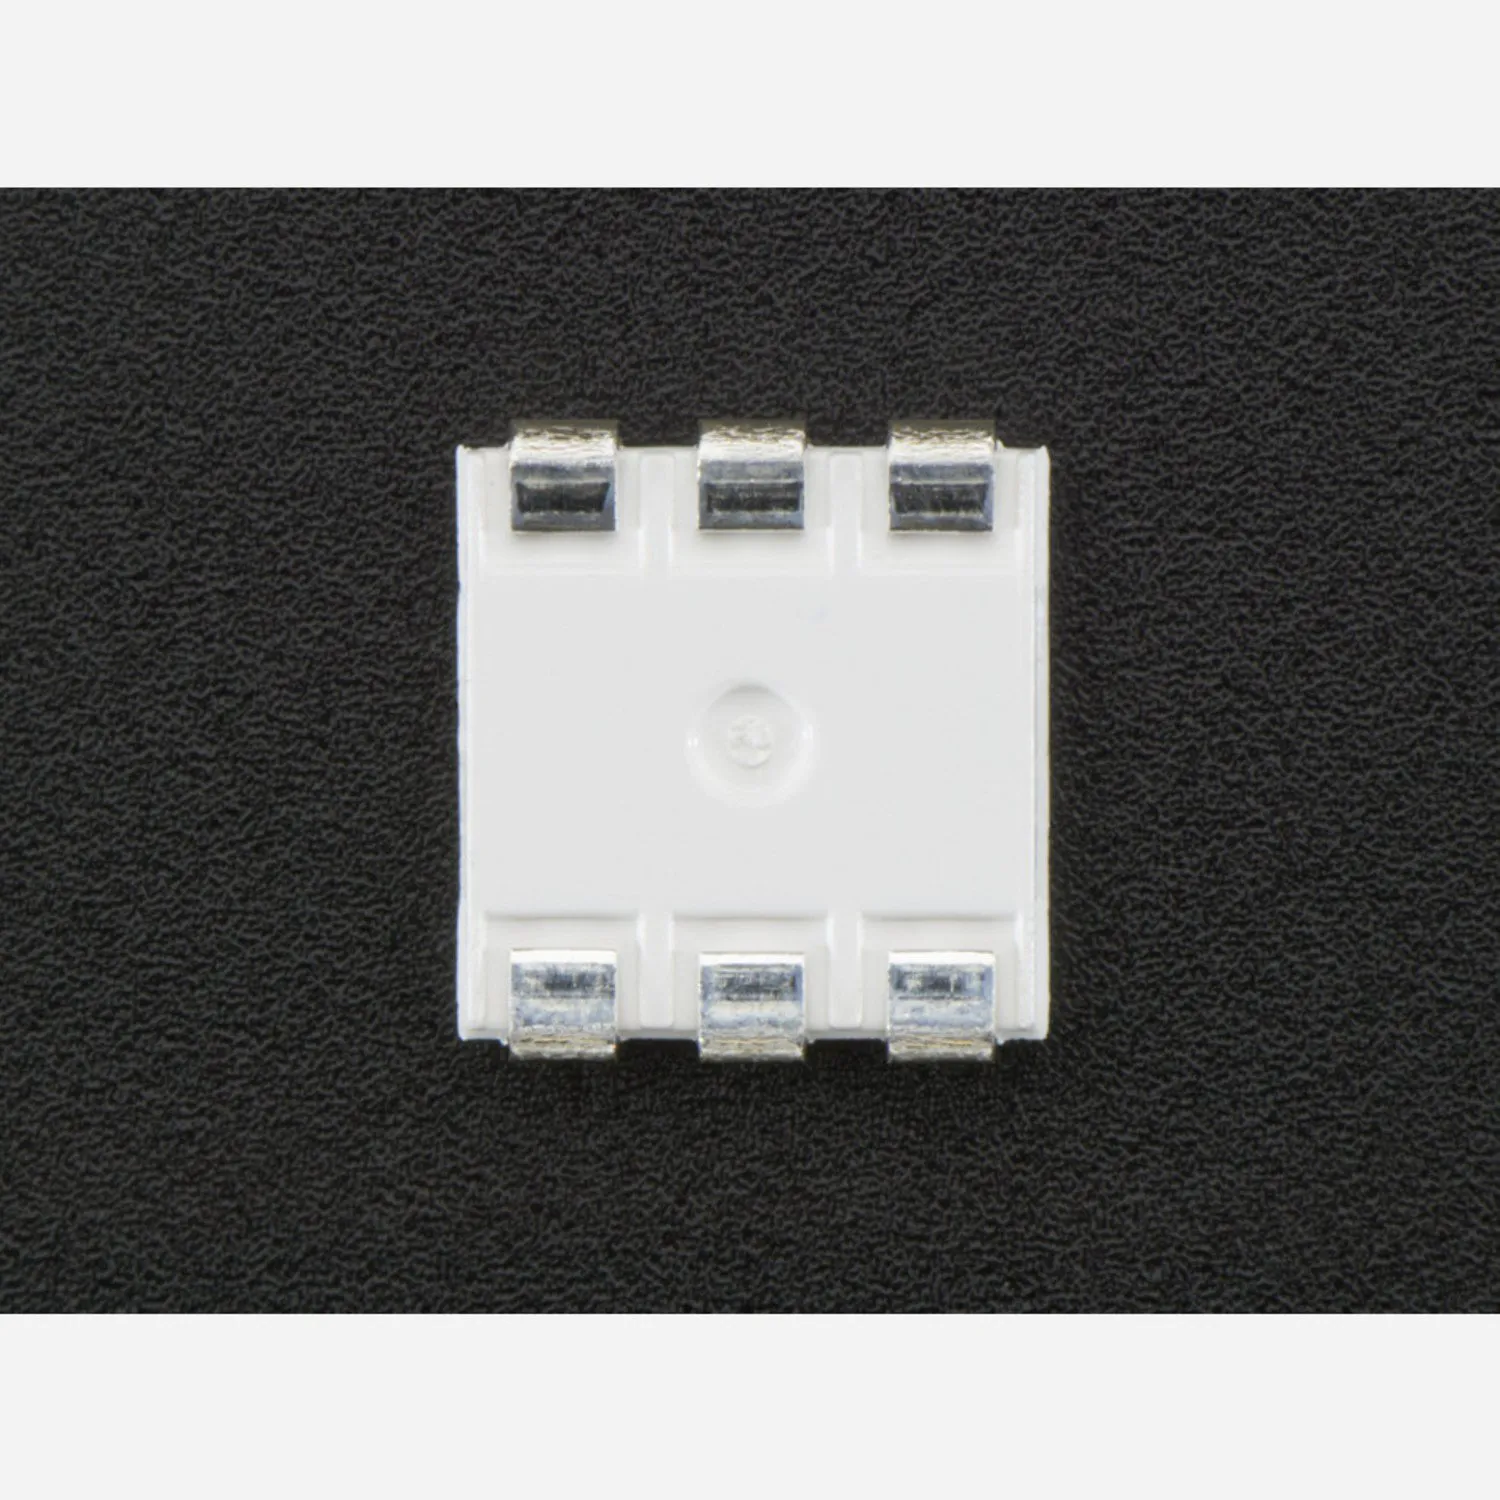 Photo of APA102 5050 Warm White LED w/ Integrated Driver Chip - 10 Pack [~3000K]